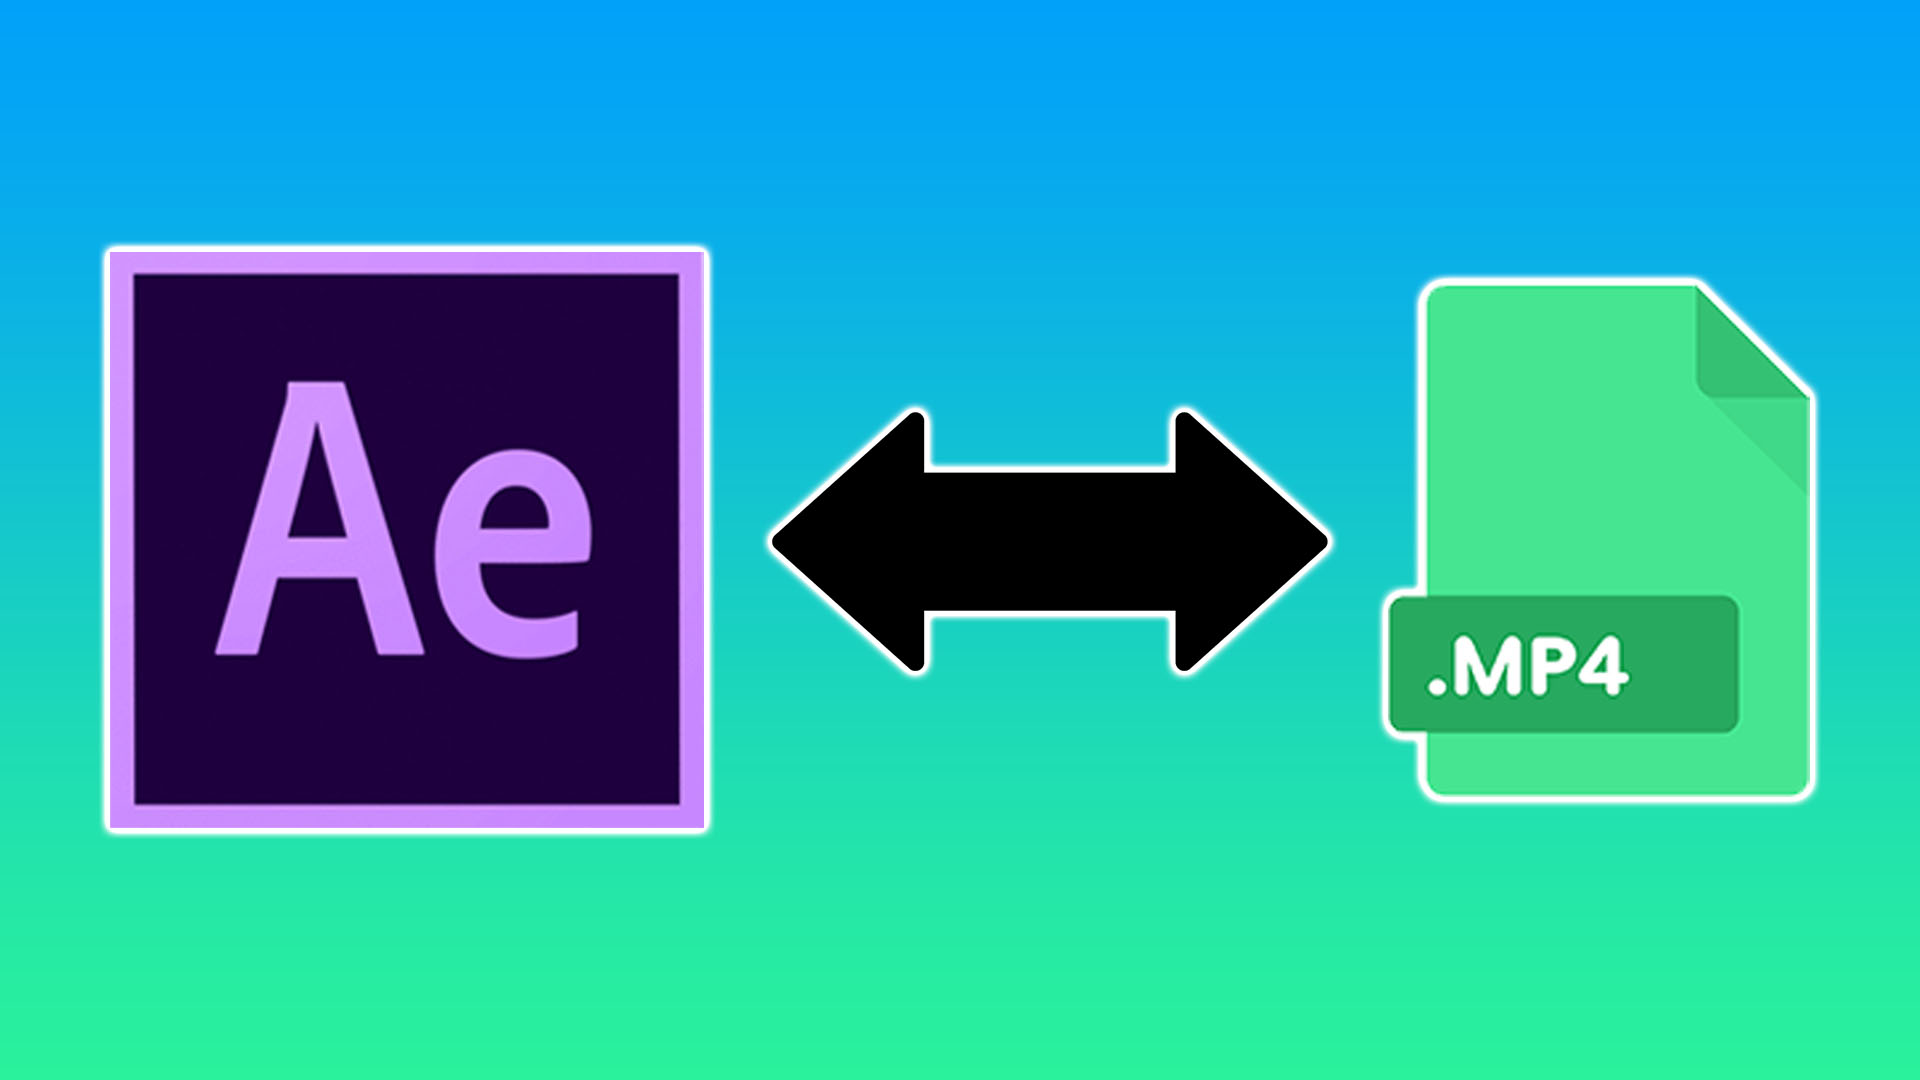 Export .MP4 Video Files in Adobe After Effects